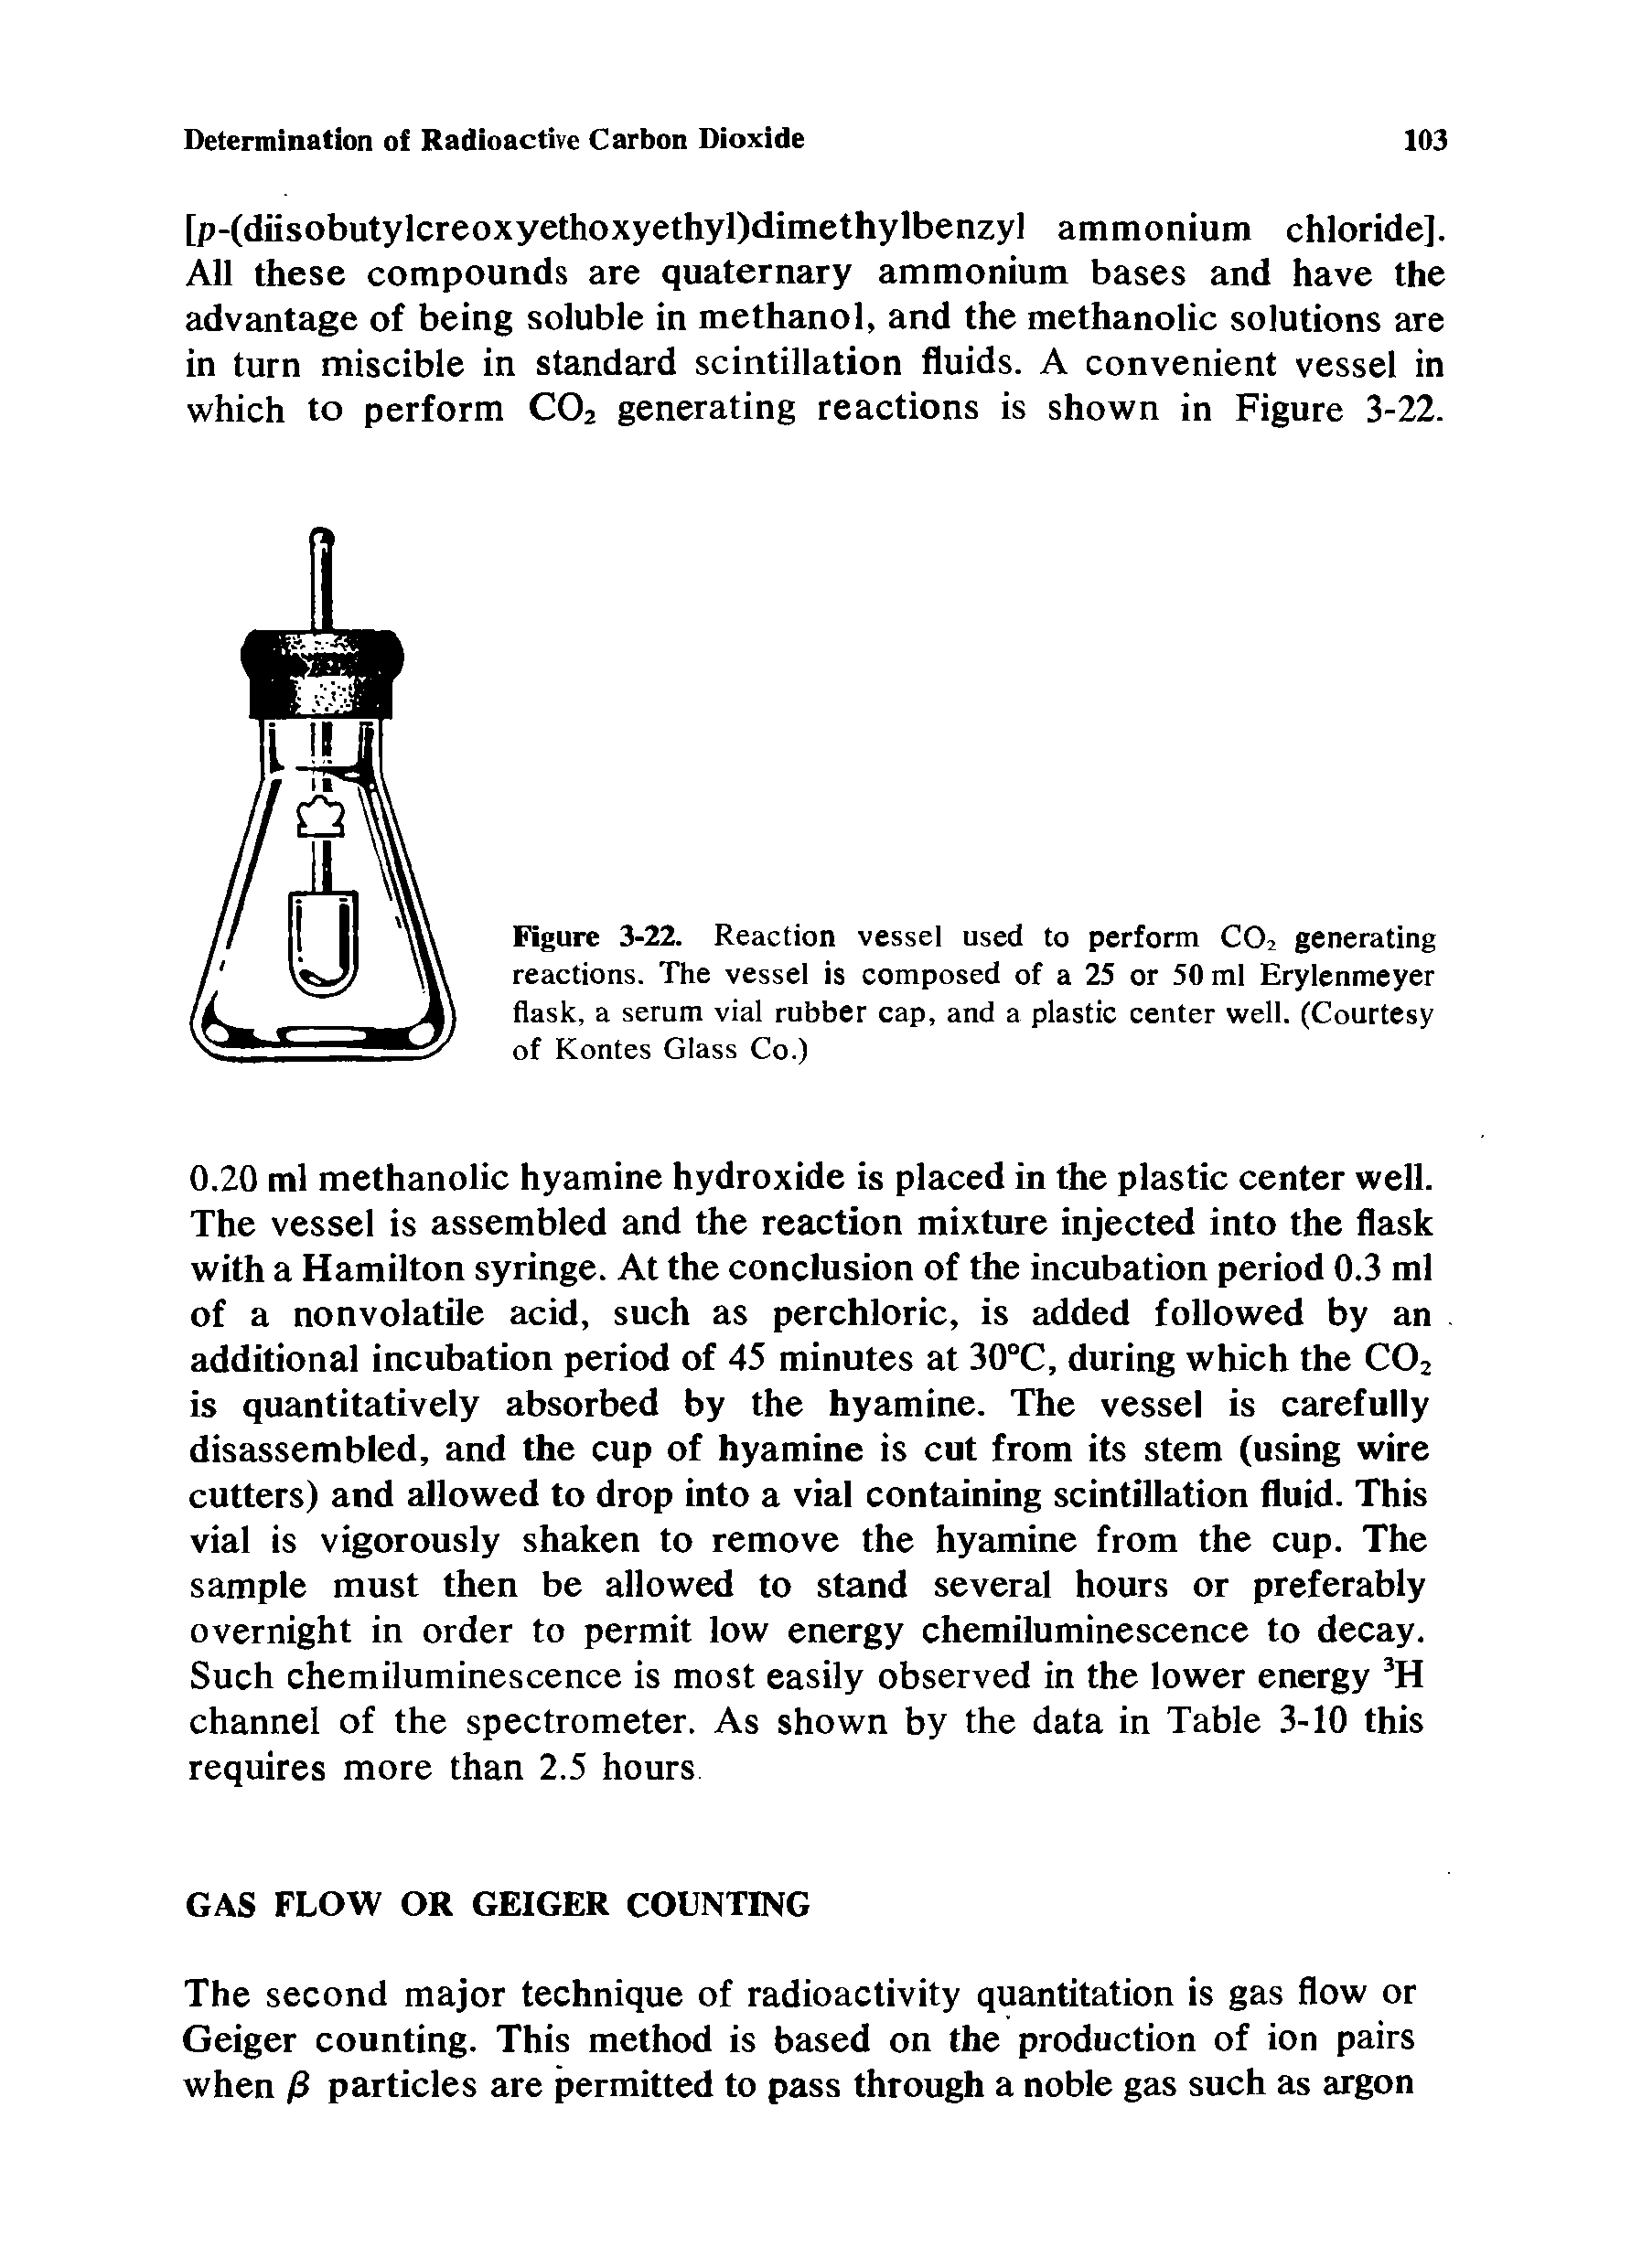 Figure 3-22. Reaction vessel used to perform CO2 generating reactions. The vessel is composed of a 25 or 50 ml Erylenmeyer flask, a serum vial rubber cap, and a plastic center well. (Courtesy of Kontes Glass Co.)...